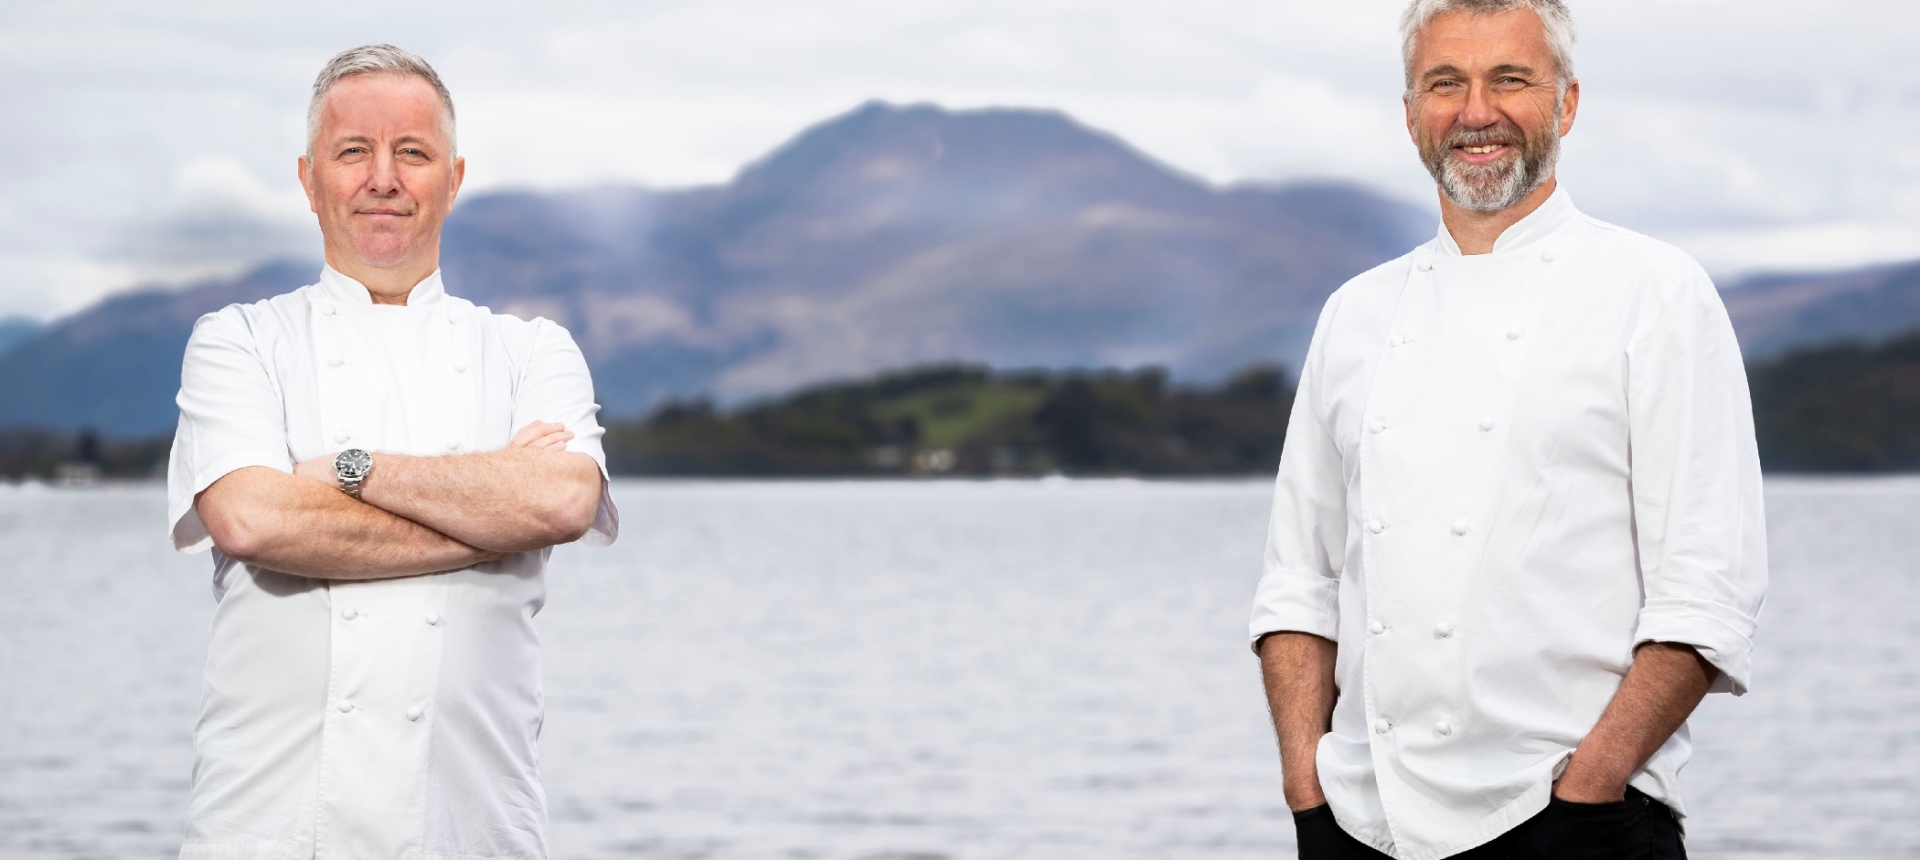 Chefs Martin Wishart and Paul Tamburrini in their chef coats standing in front of Loch Lomond